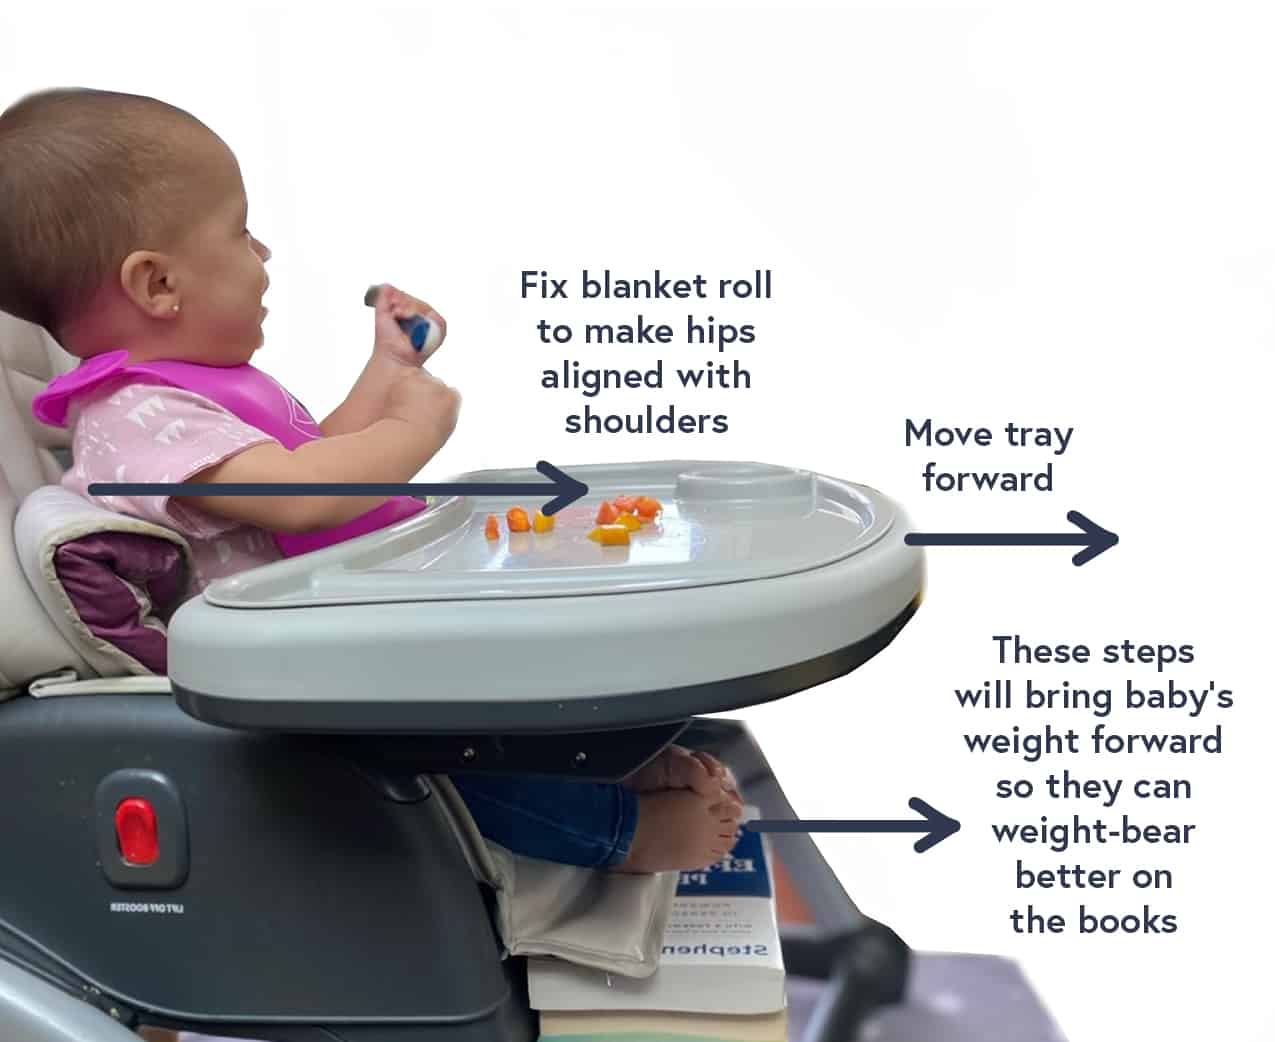 Baby High-Chair for Best Mealtime Experience - Order Now!